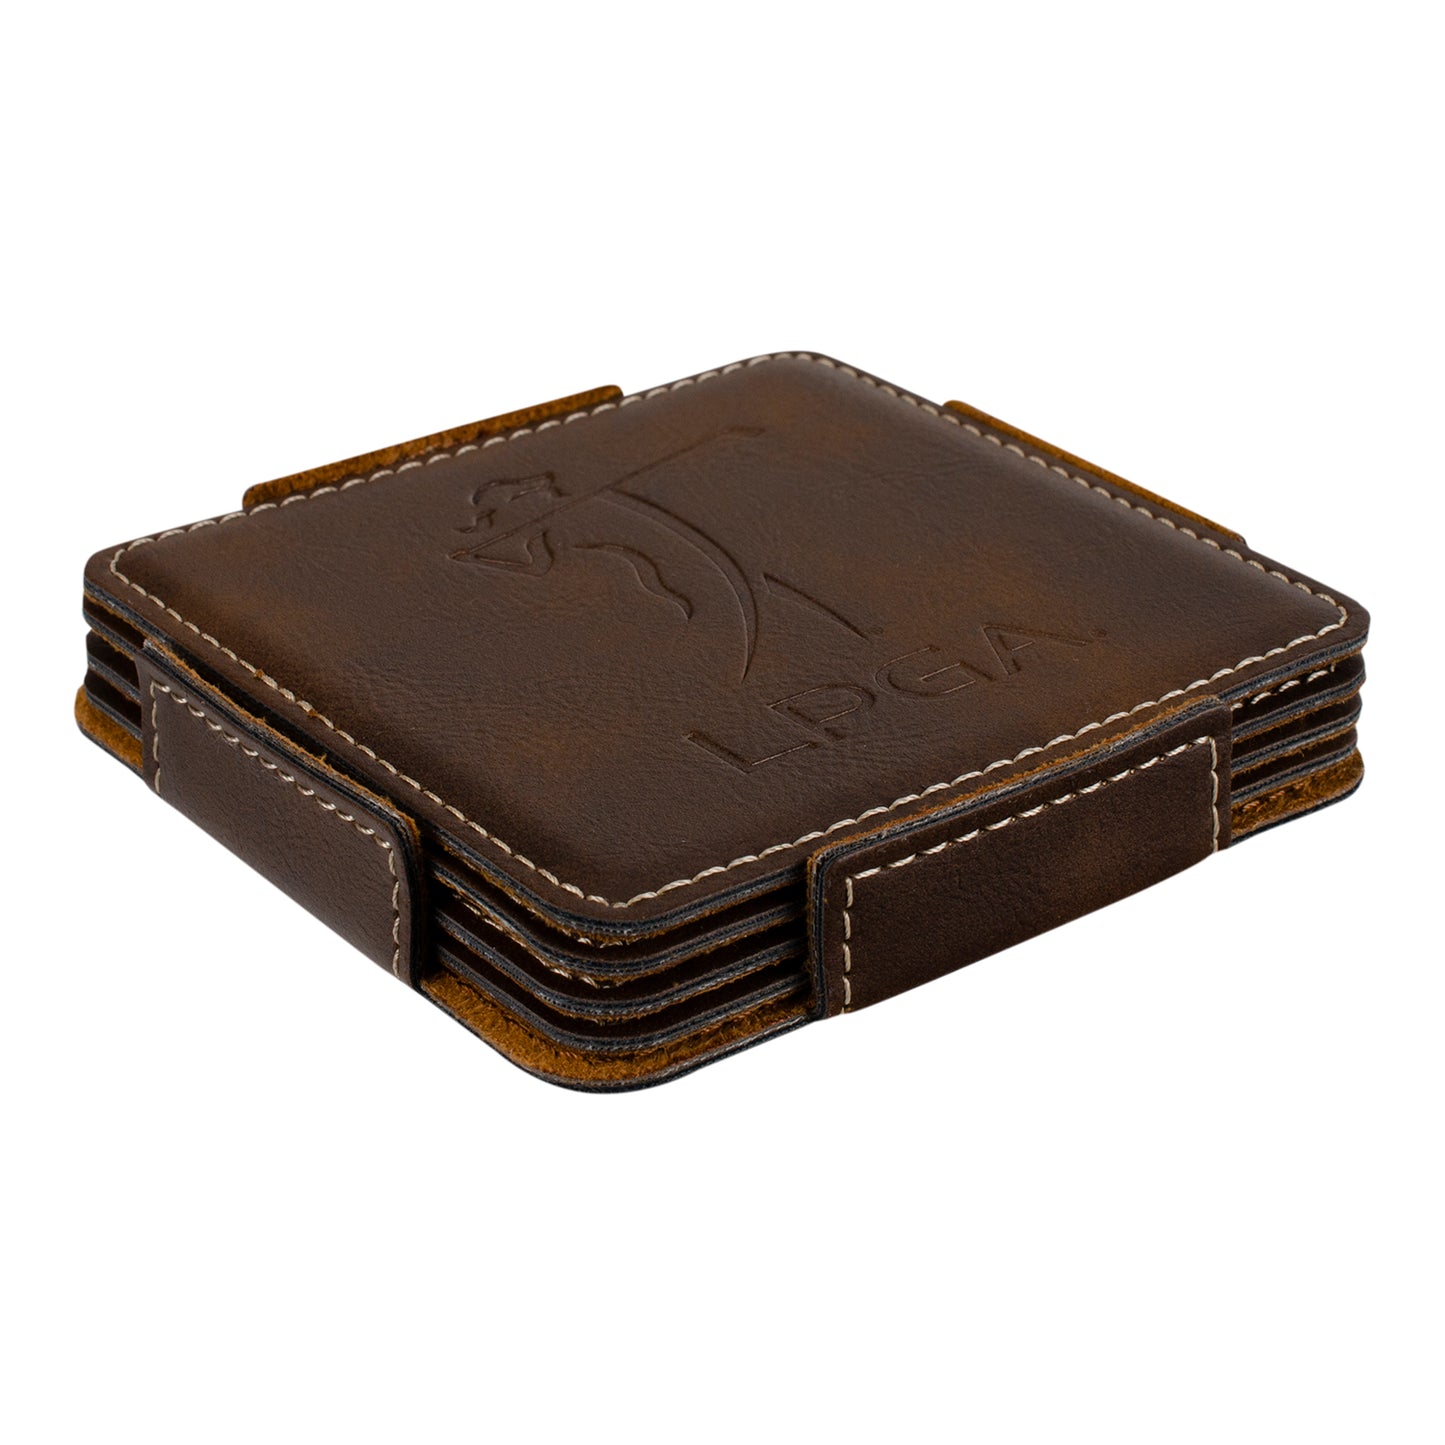 Tournament Solutions LPGA Leather Coaster - Angled Stacked Holder View